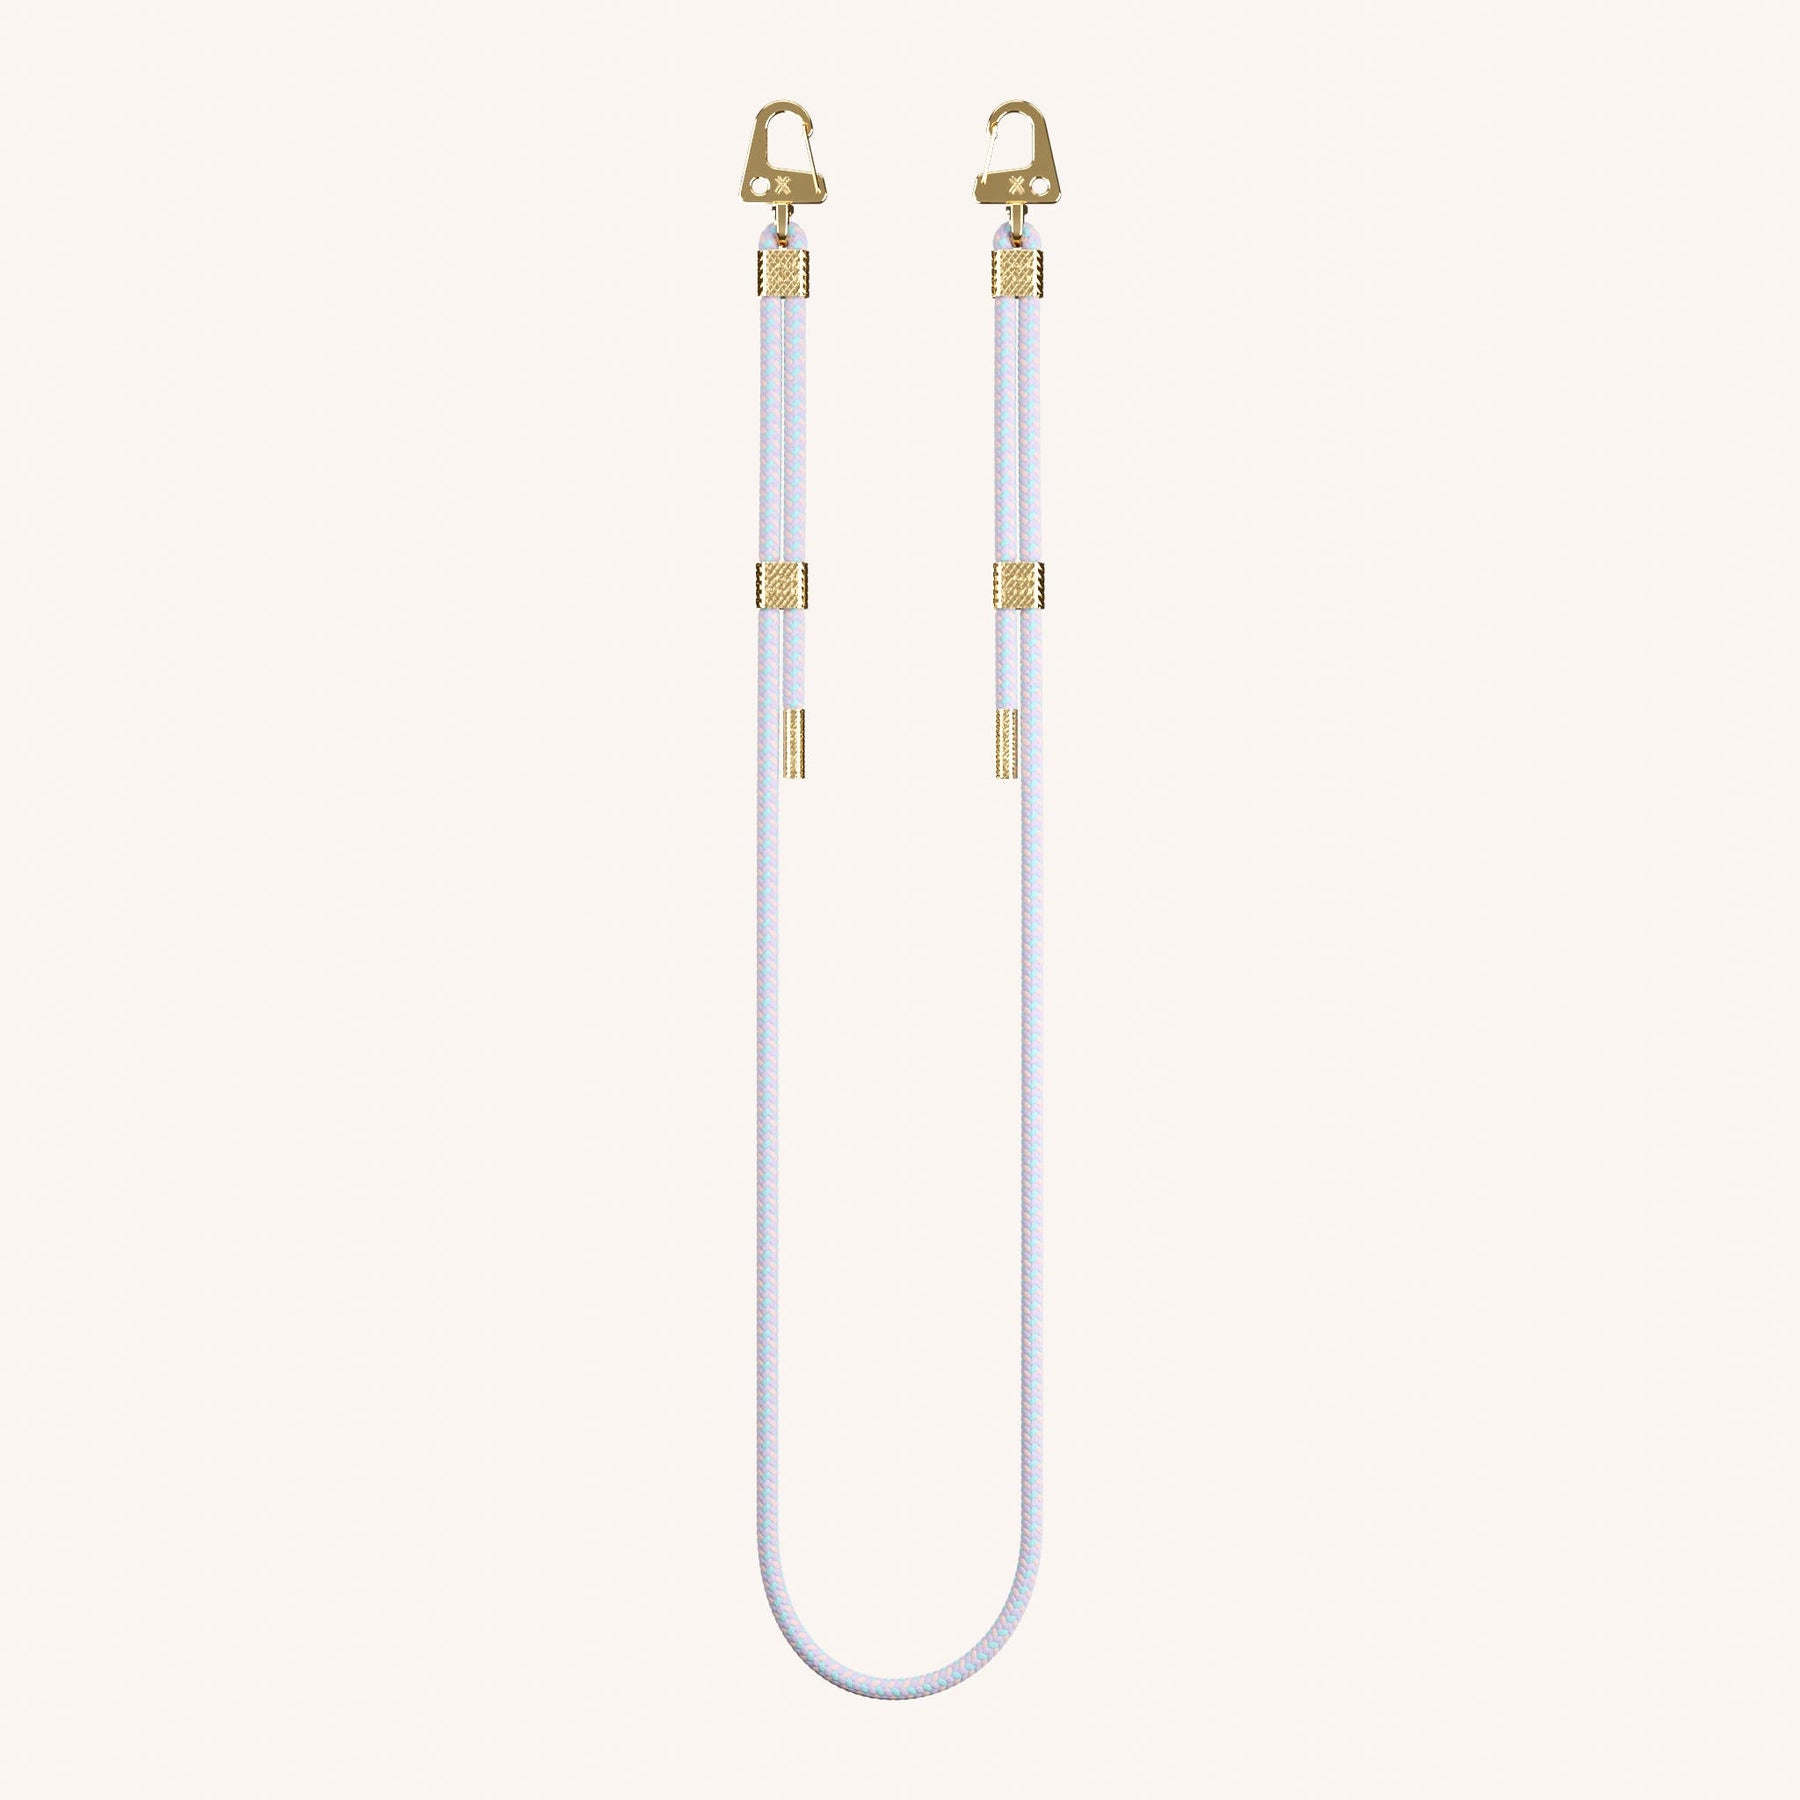 Phone Strap Carabiner Rope in Vibrant Pastel Total View | XOUXOU